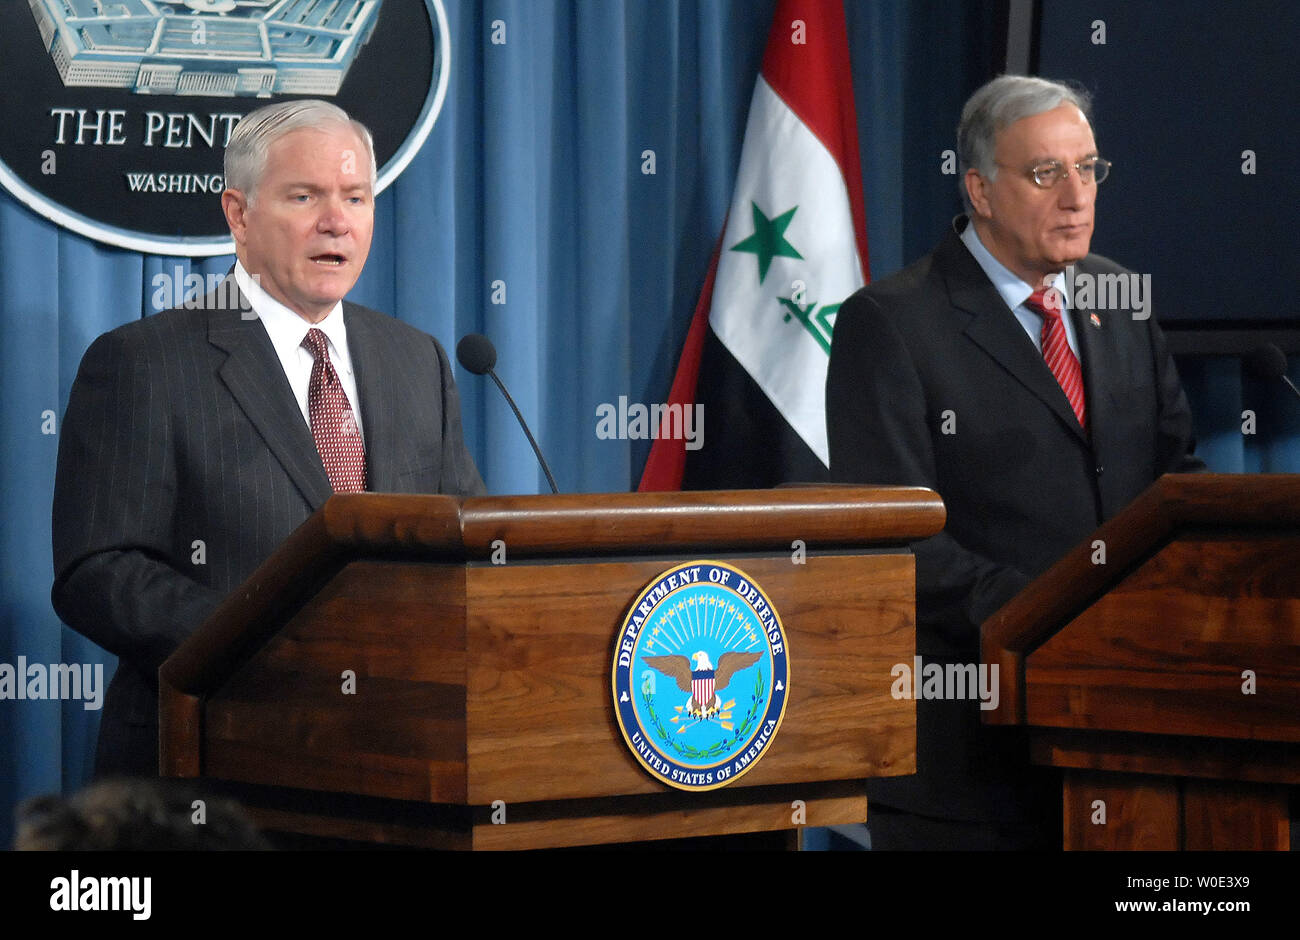 U.S. Secretary of Defense Robert Gates (L) and Iraqi Defense Minister Abd al-Qadir al-Mufrij hold a news conference at the Pentagon in Virginia on January 10, 2008. The two spoke about military strategy and security in Iraq. (UPI Photo/Kevin Dietsch) Stock Photo